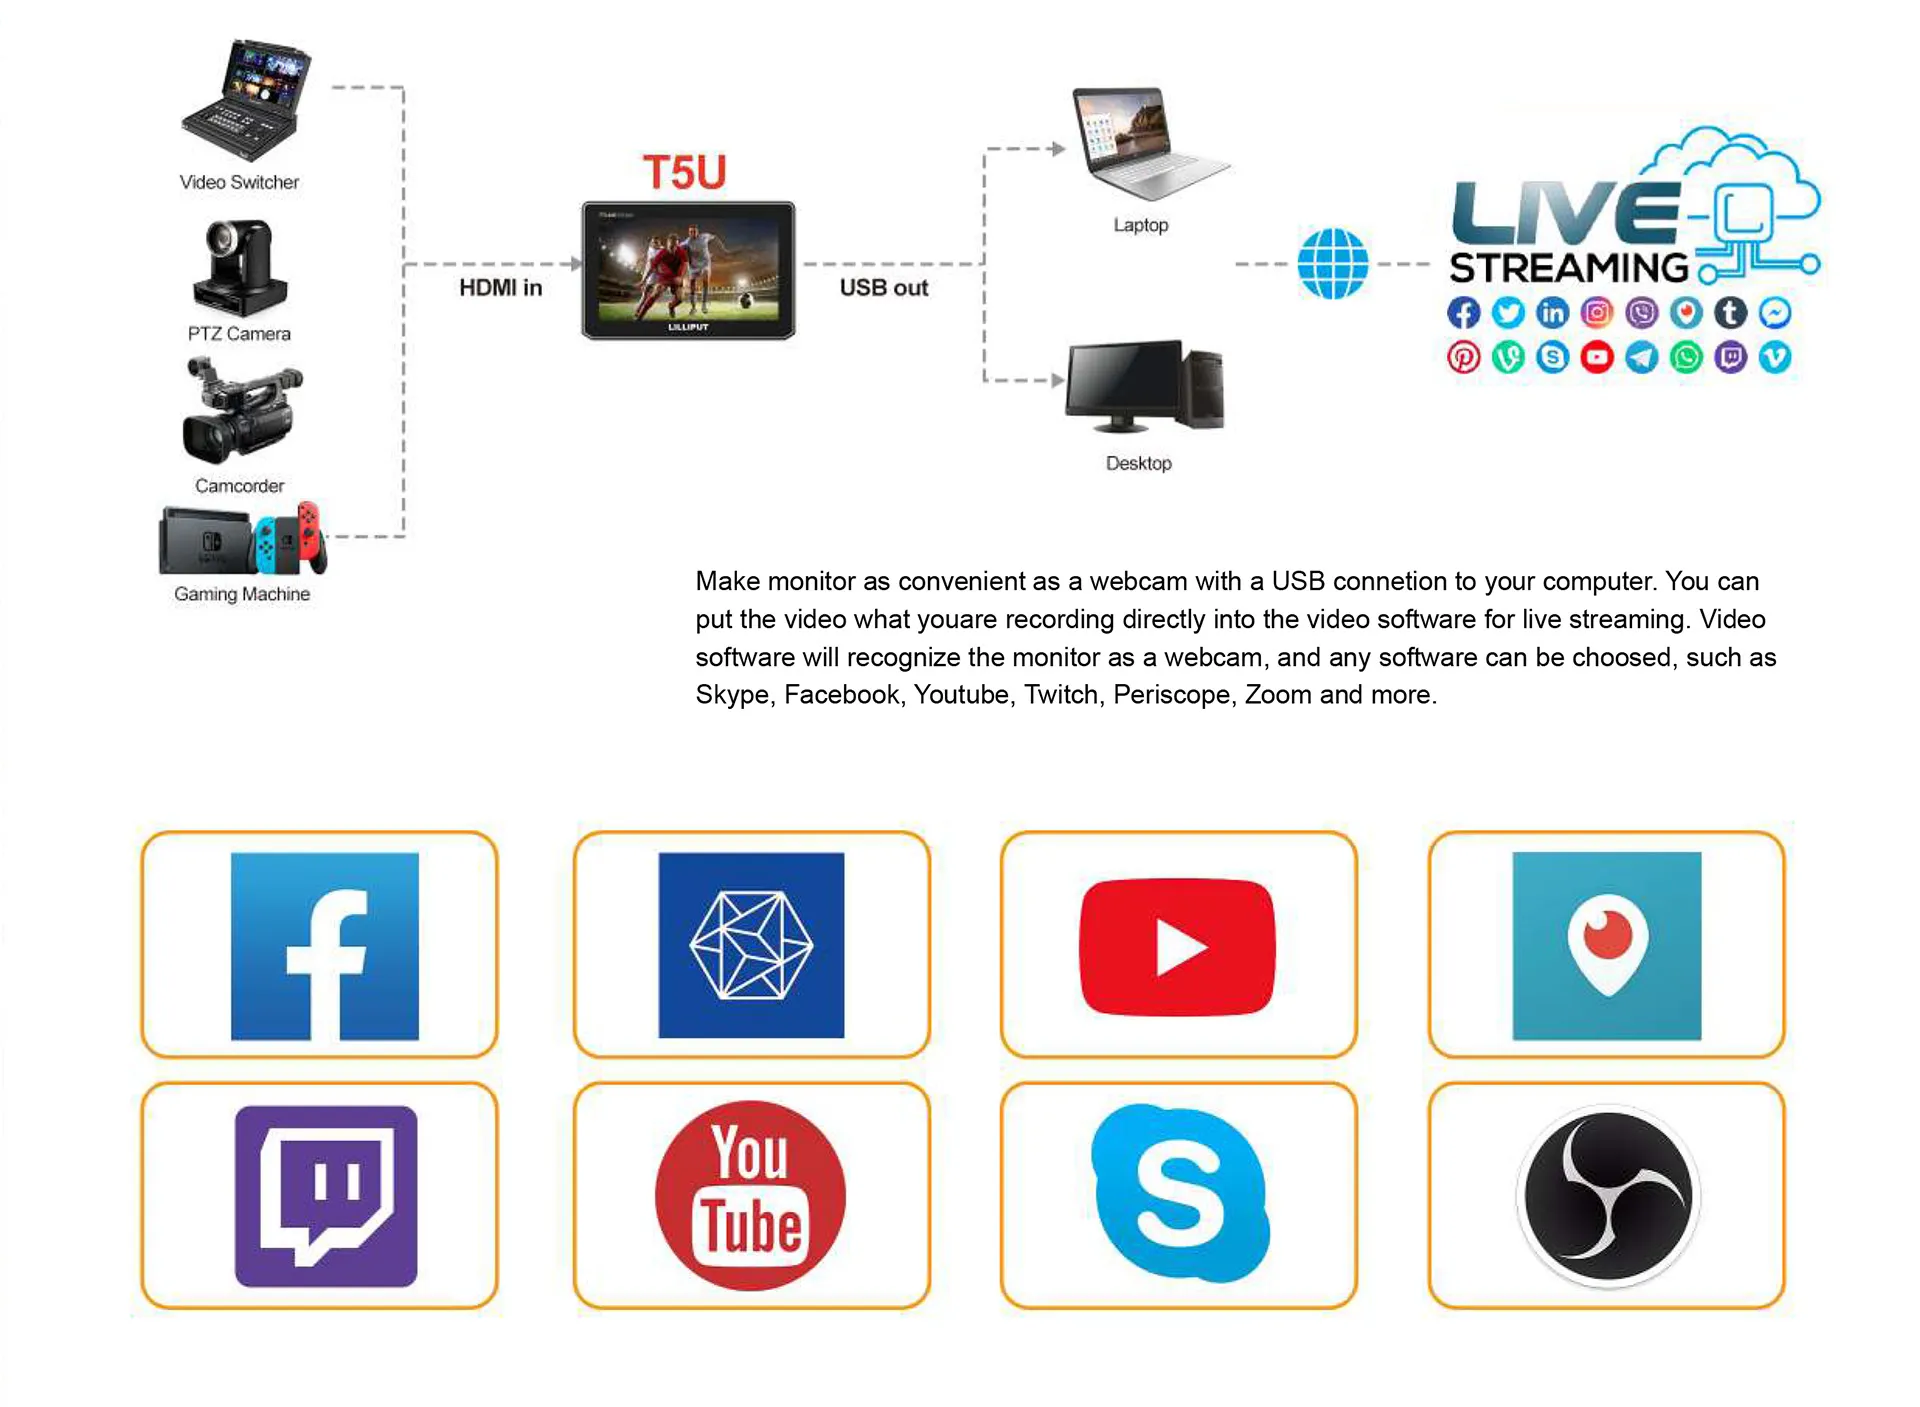 Lilliput T5U - 5 inch live streaming on-camera touch monitor